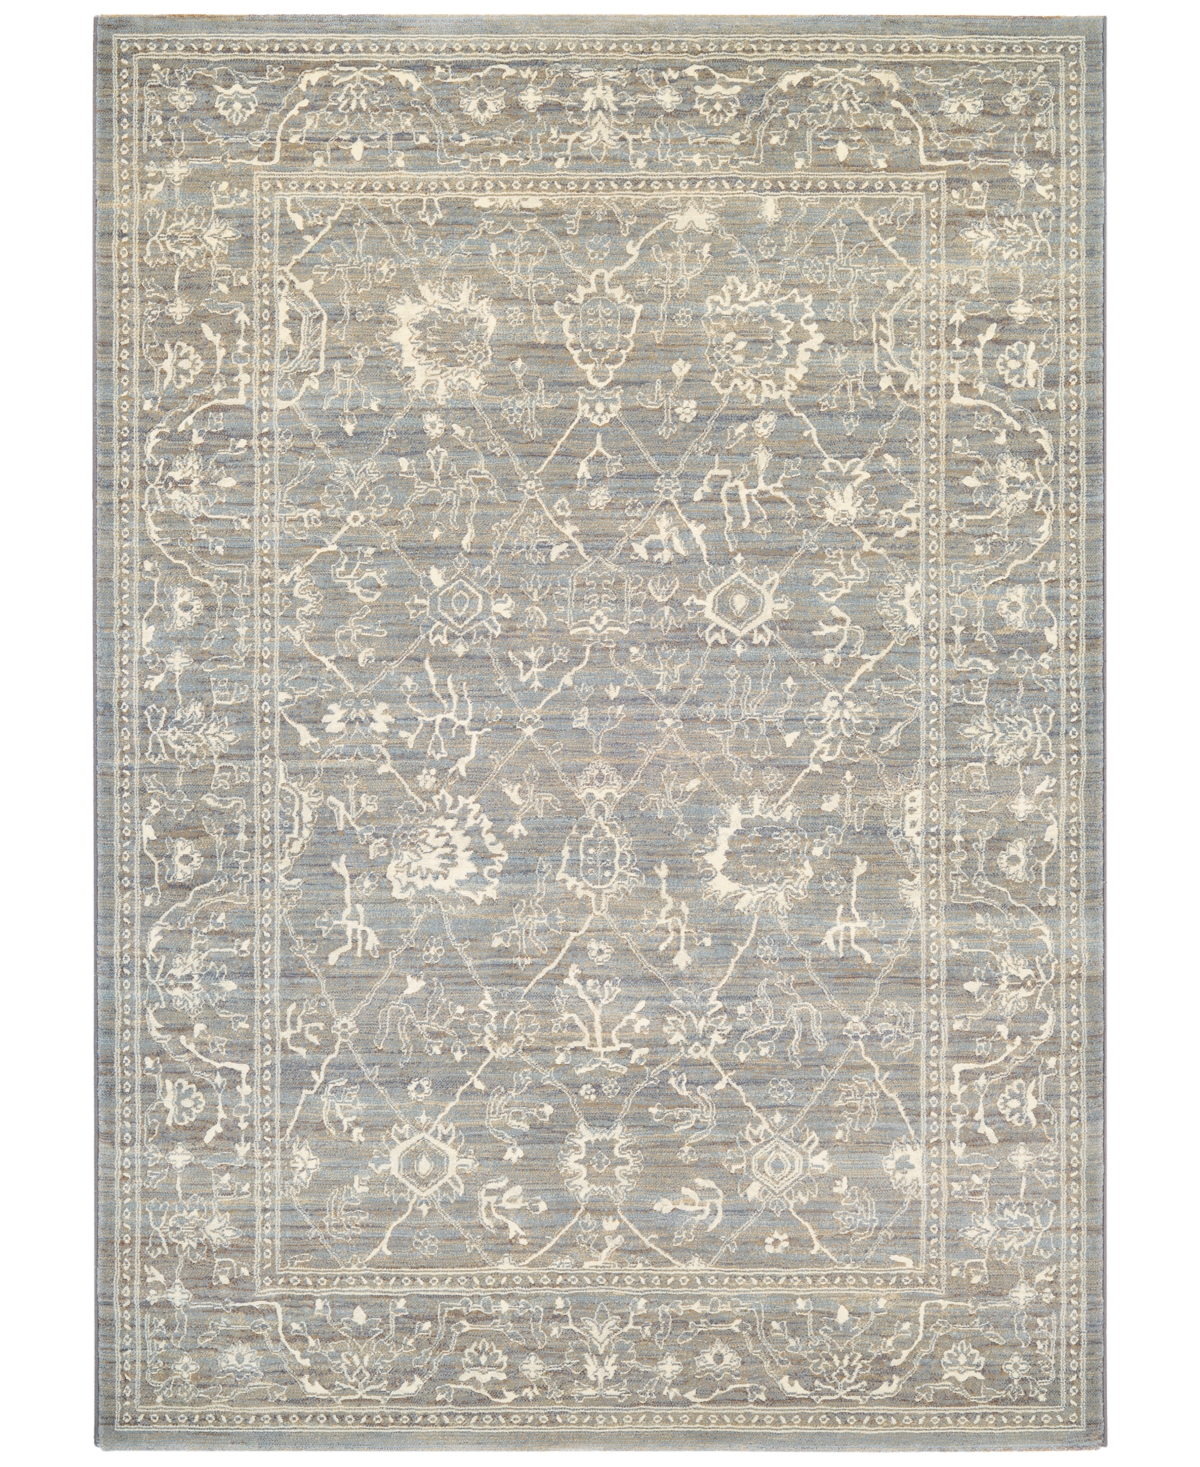 Couristan Mckinley Persian Arabesque Charcoal-ivory 7'10" X 11'2" Area Rug